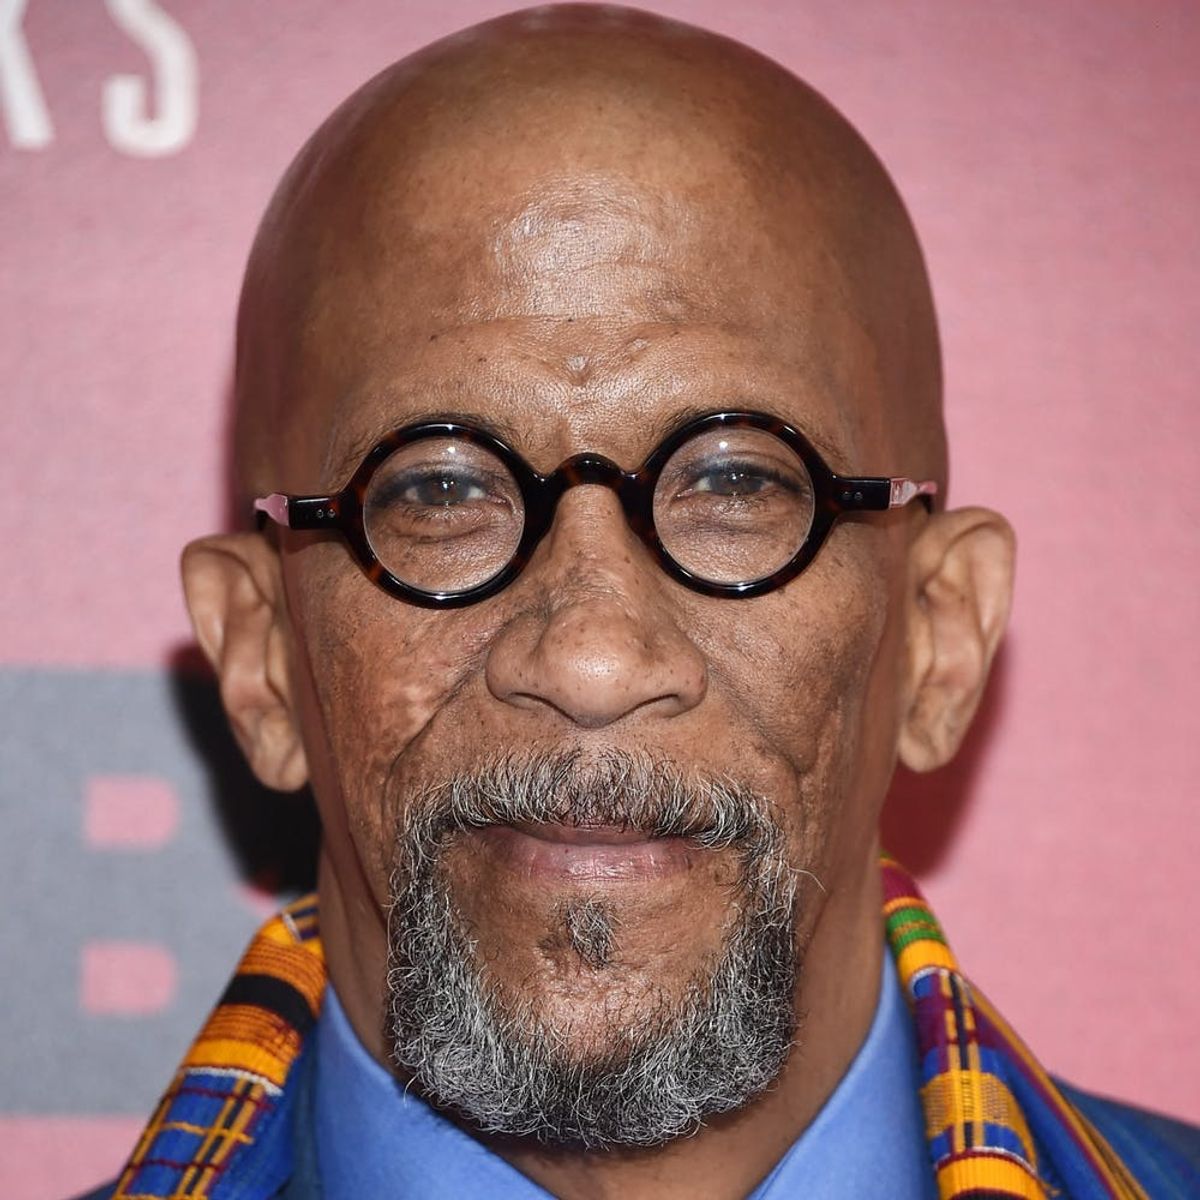 ‘House of Cards’ Actor Reg E. Cathey Has Passed Away at Age 59